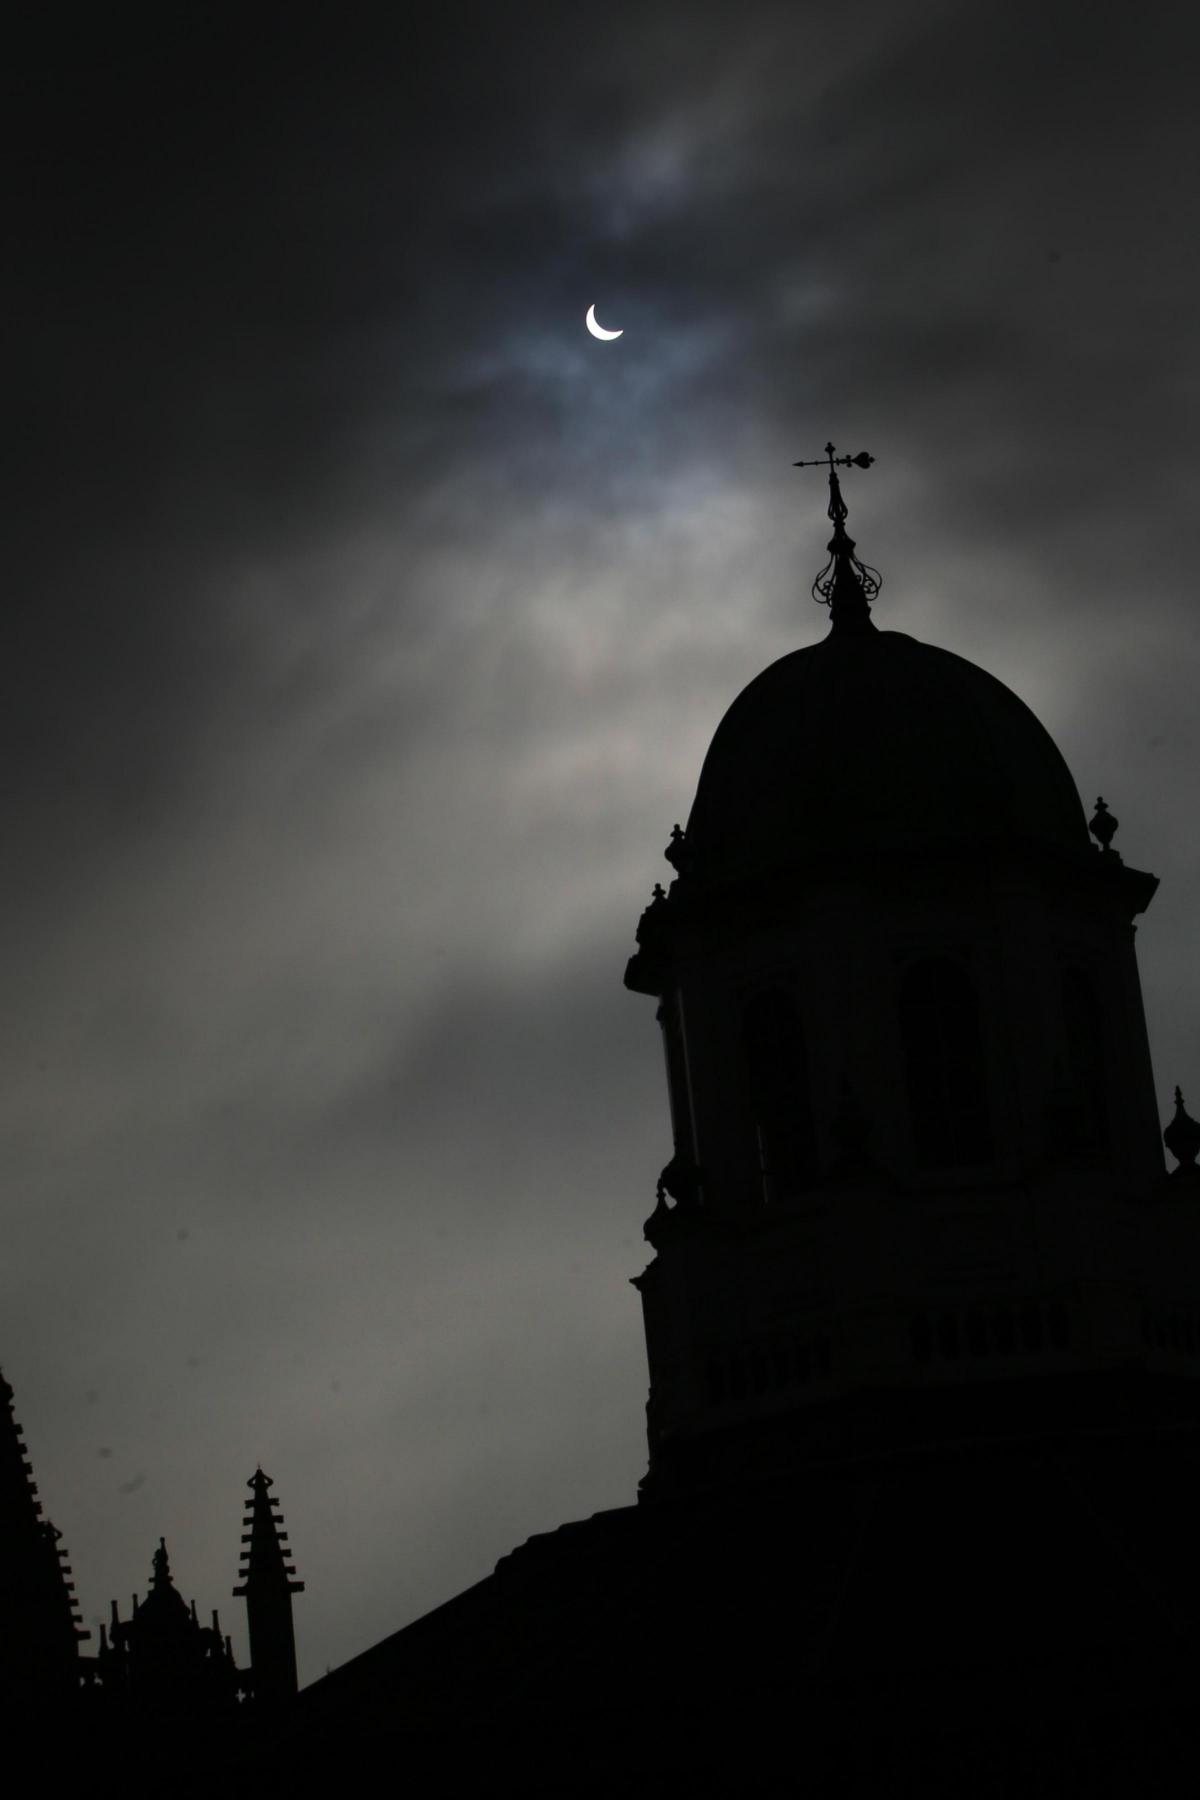 The solar eclipse around the Sheldonian